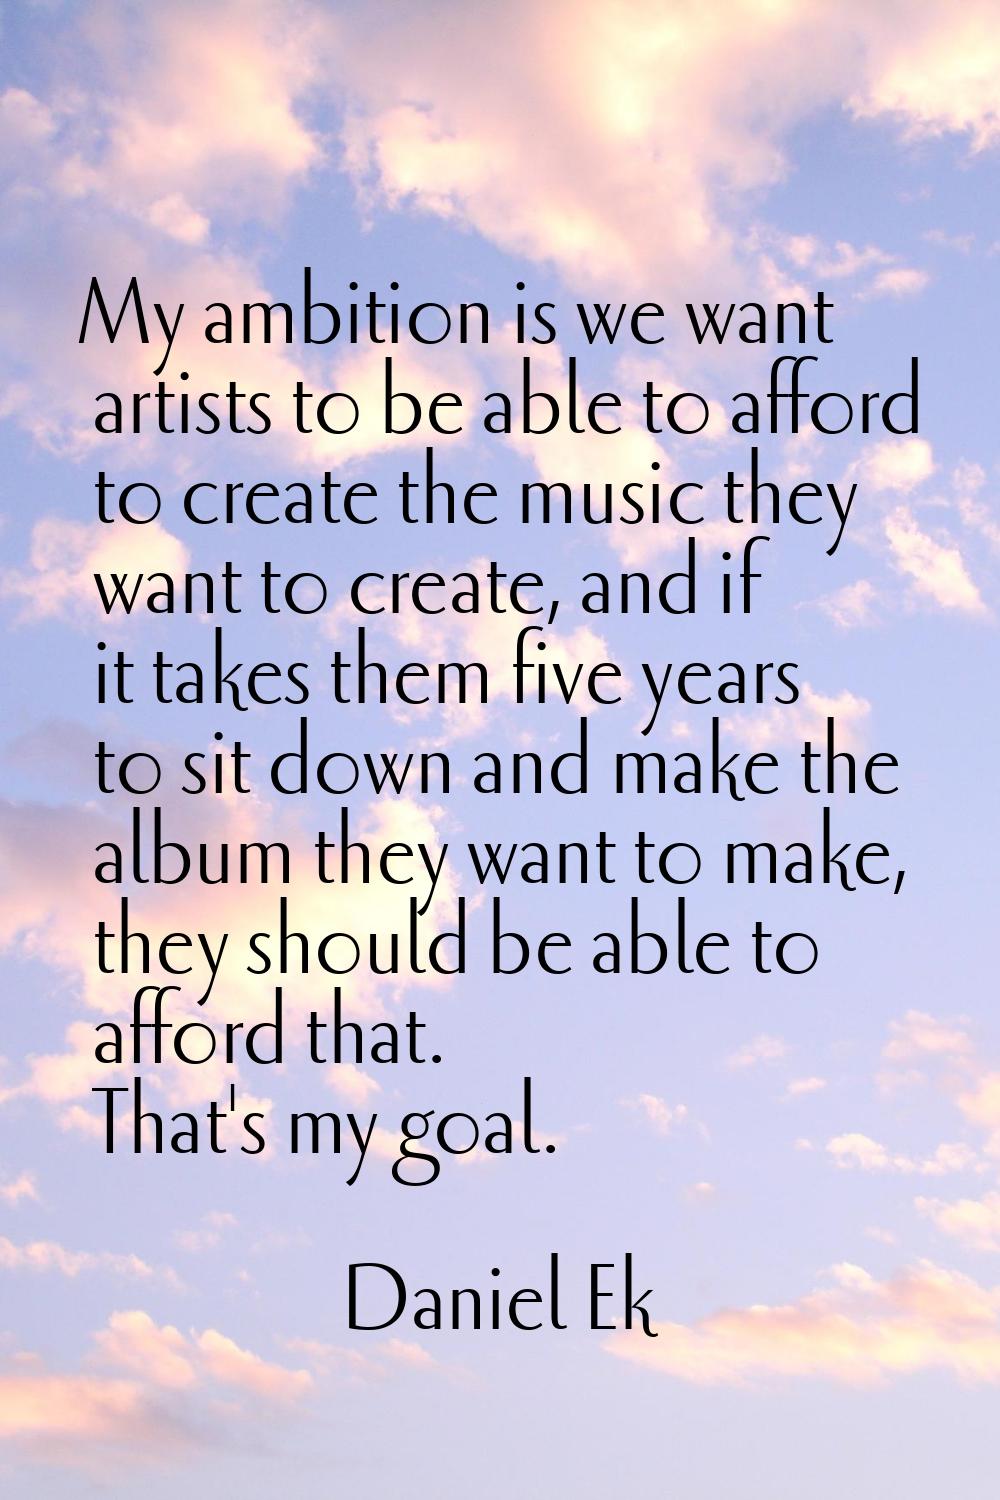 My ambition is we want artists to be able to afford to create the music they want to create, and if